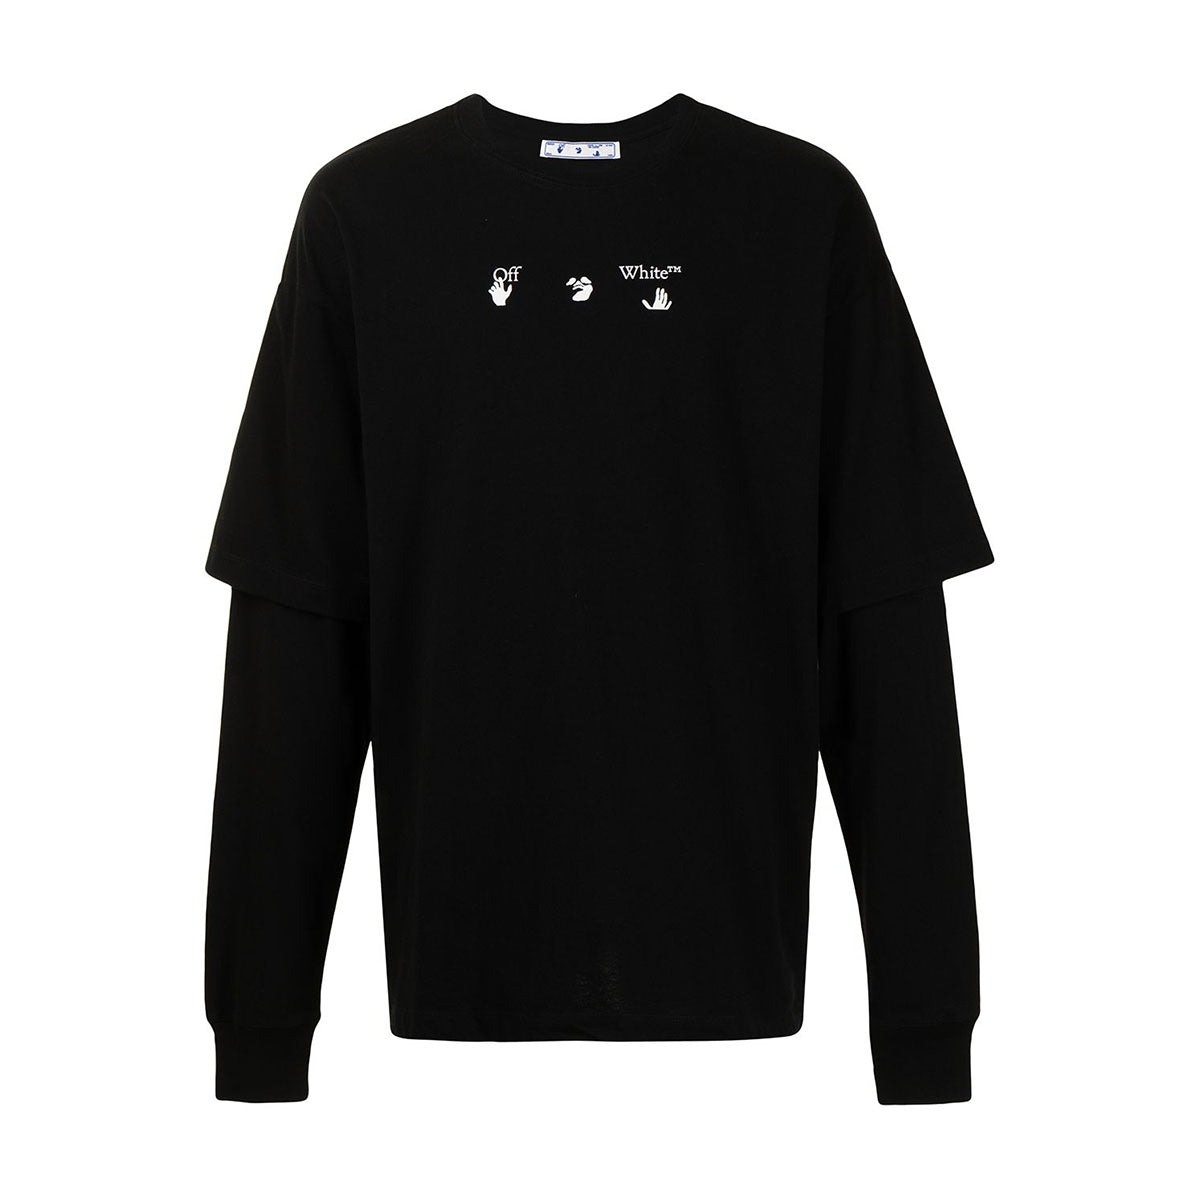 Double layer sleeve t-shirt black